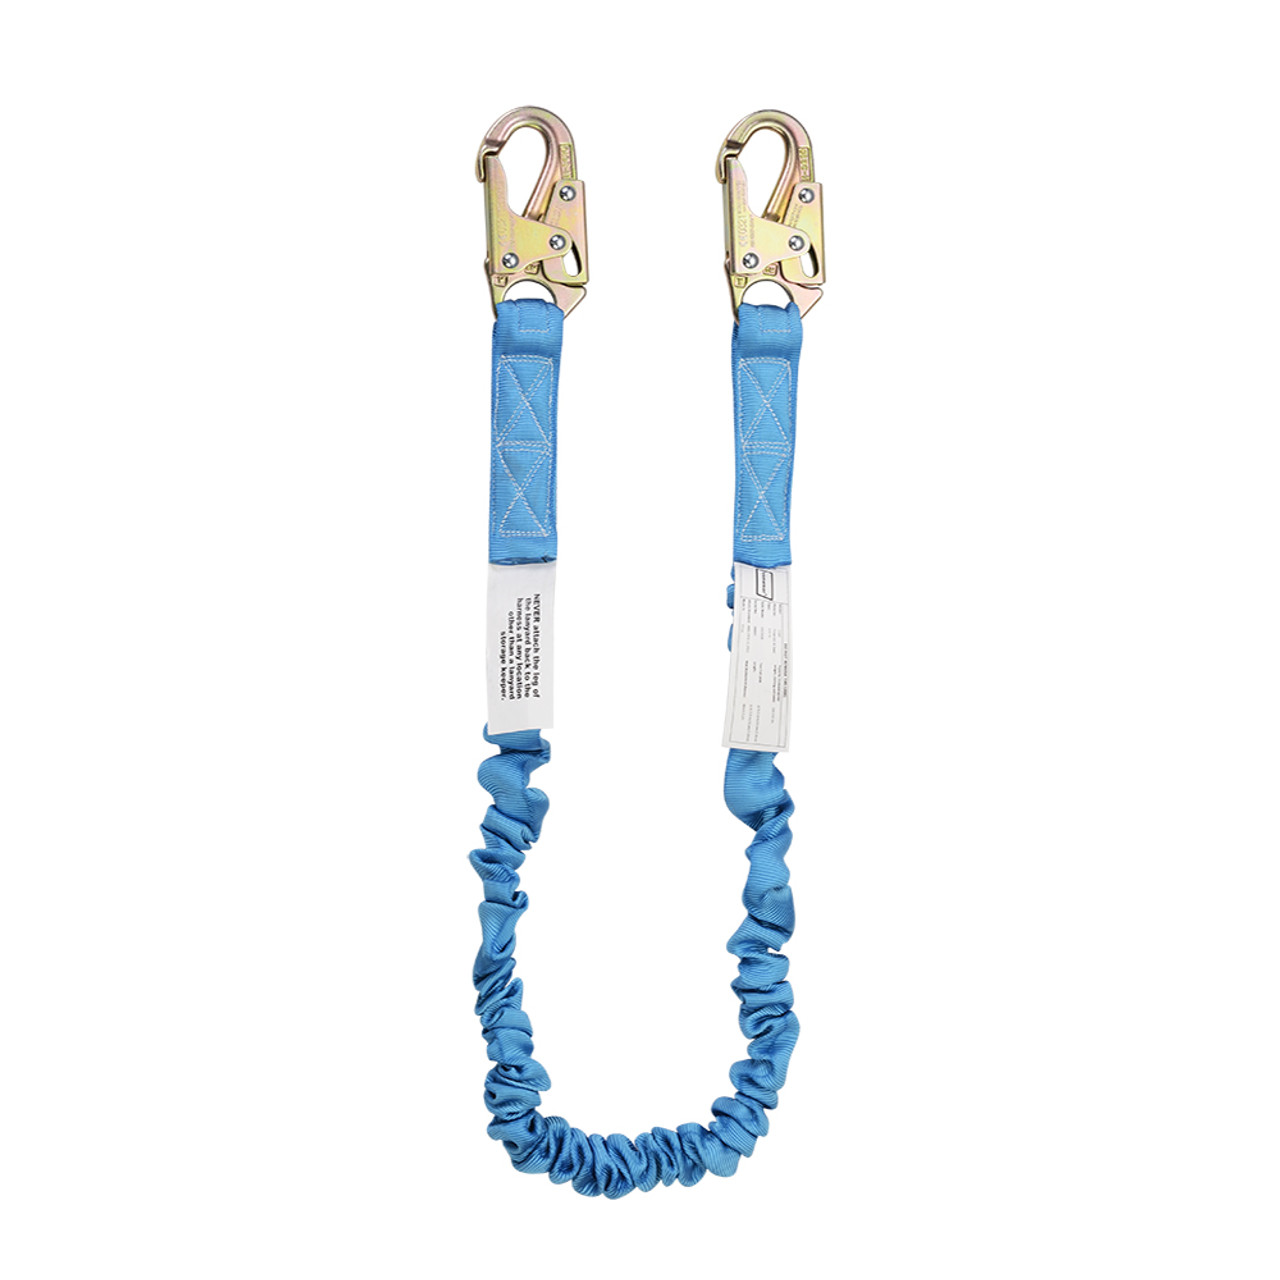 Ironwear Safety, 2320 6 feet Lanyard Snap Hooks on Both Sides - Gryphon  Safety Equipment